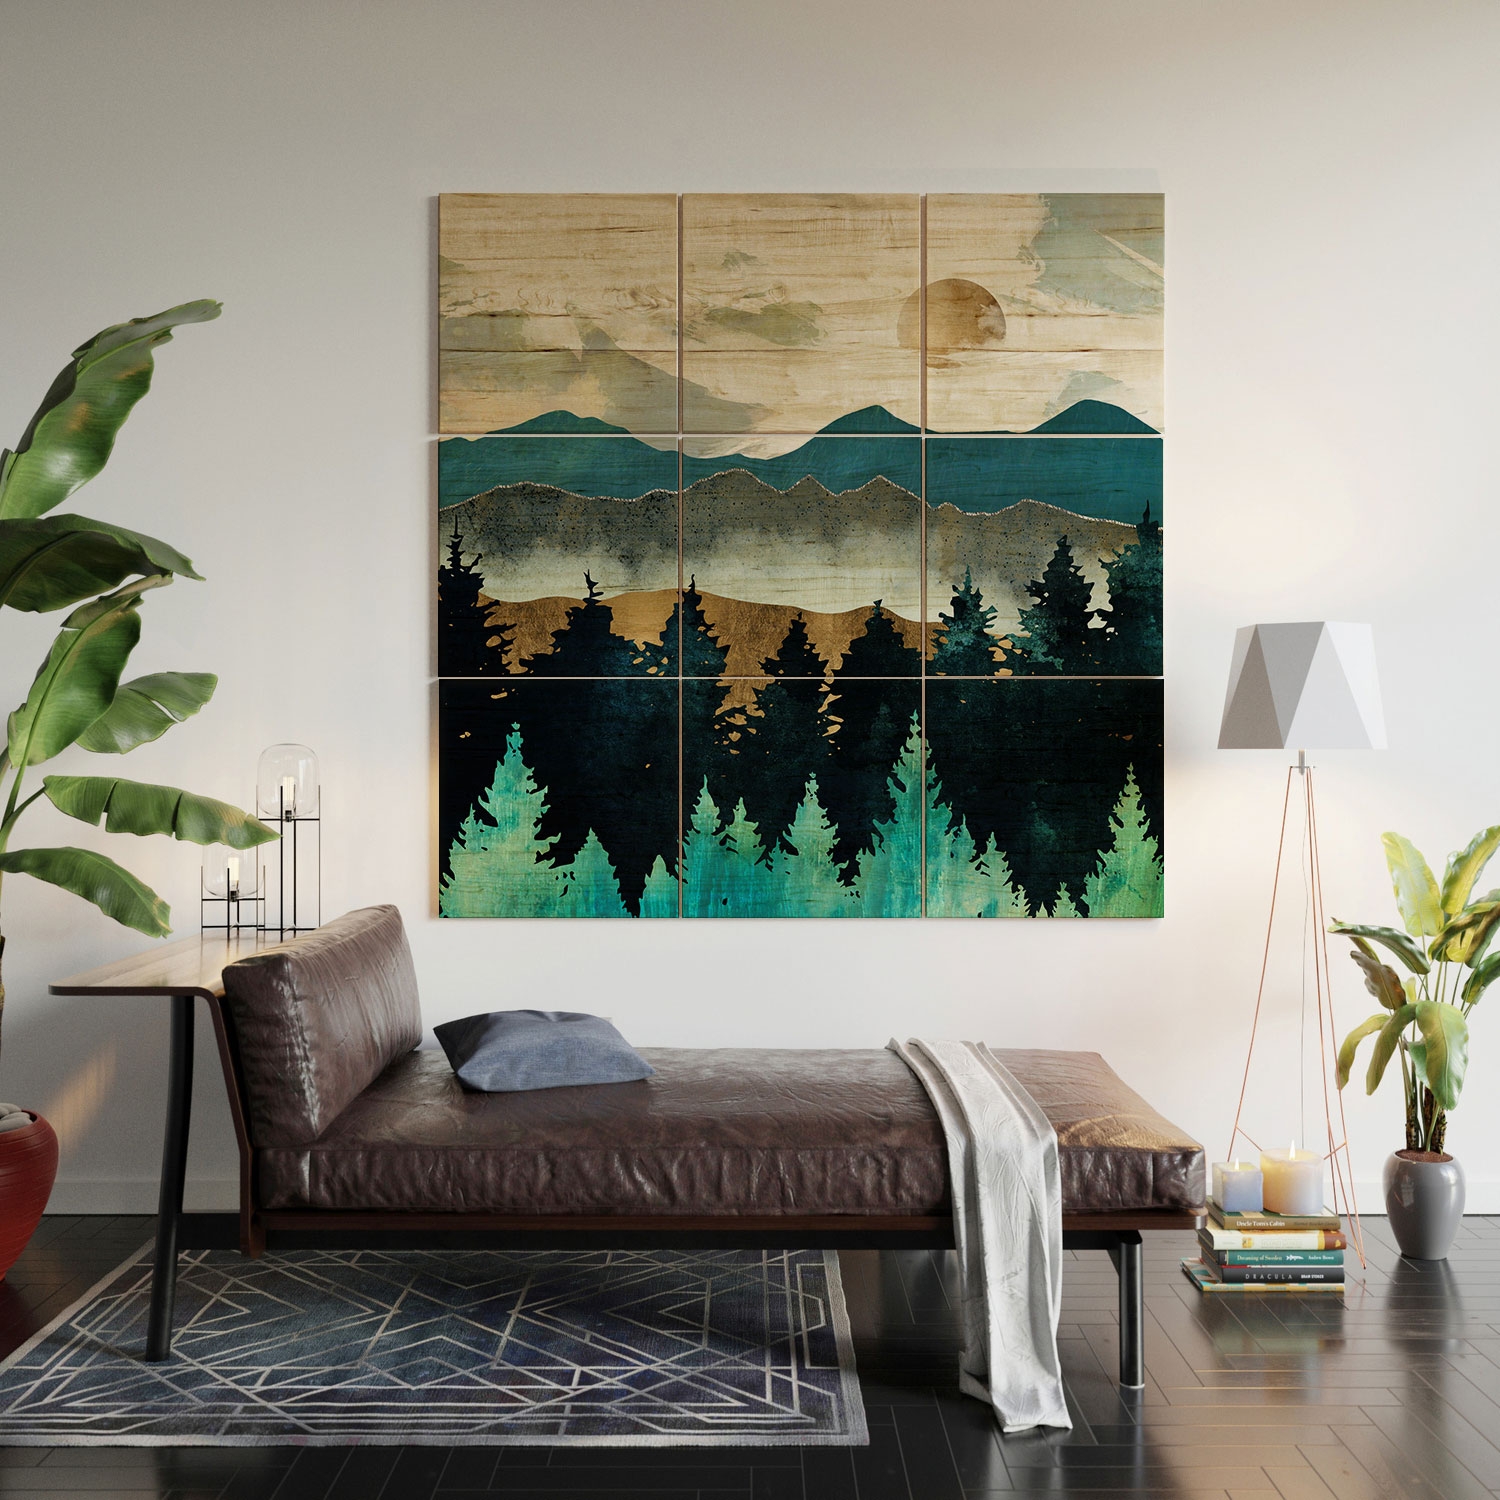 Forest Mist by SpaceFrogDesigns - Wood Wall Mural3' X 3' (Nine 12" Wood Squares) - Image 4